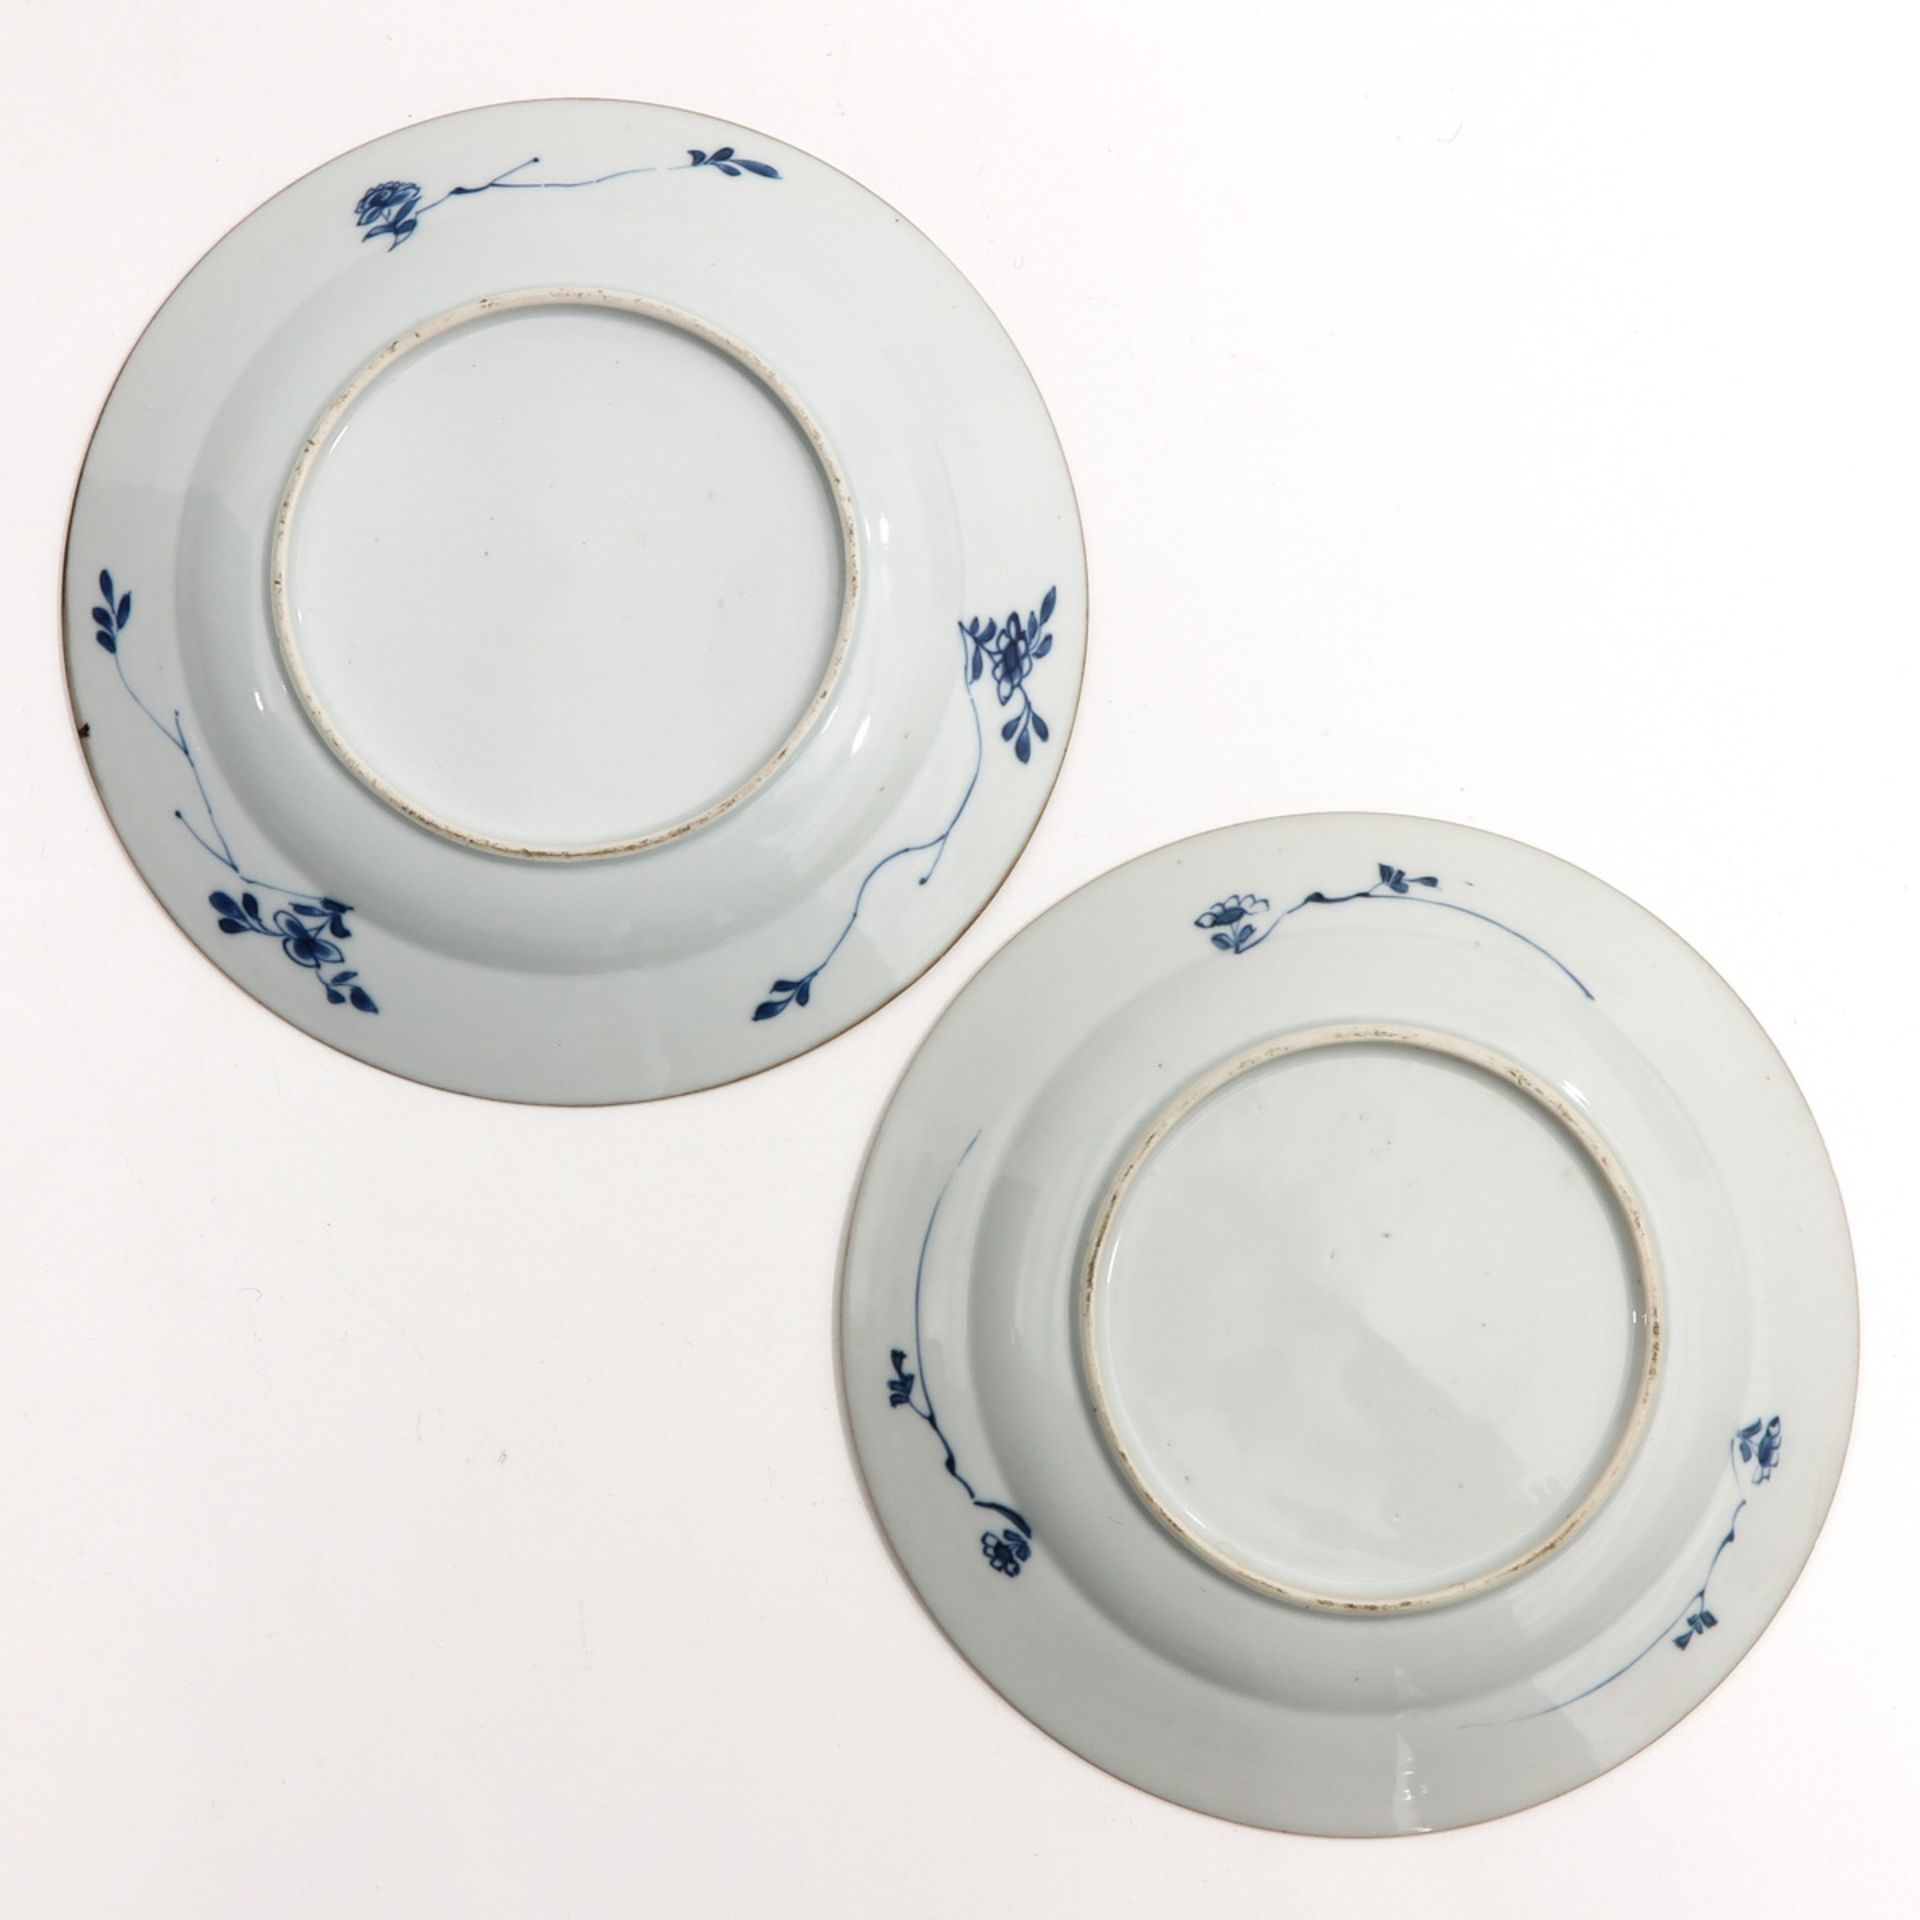 A Series of 4 Blue and white Plates - Image 6 of 9